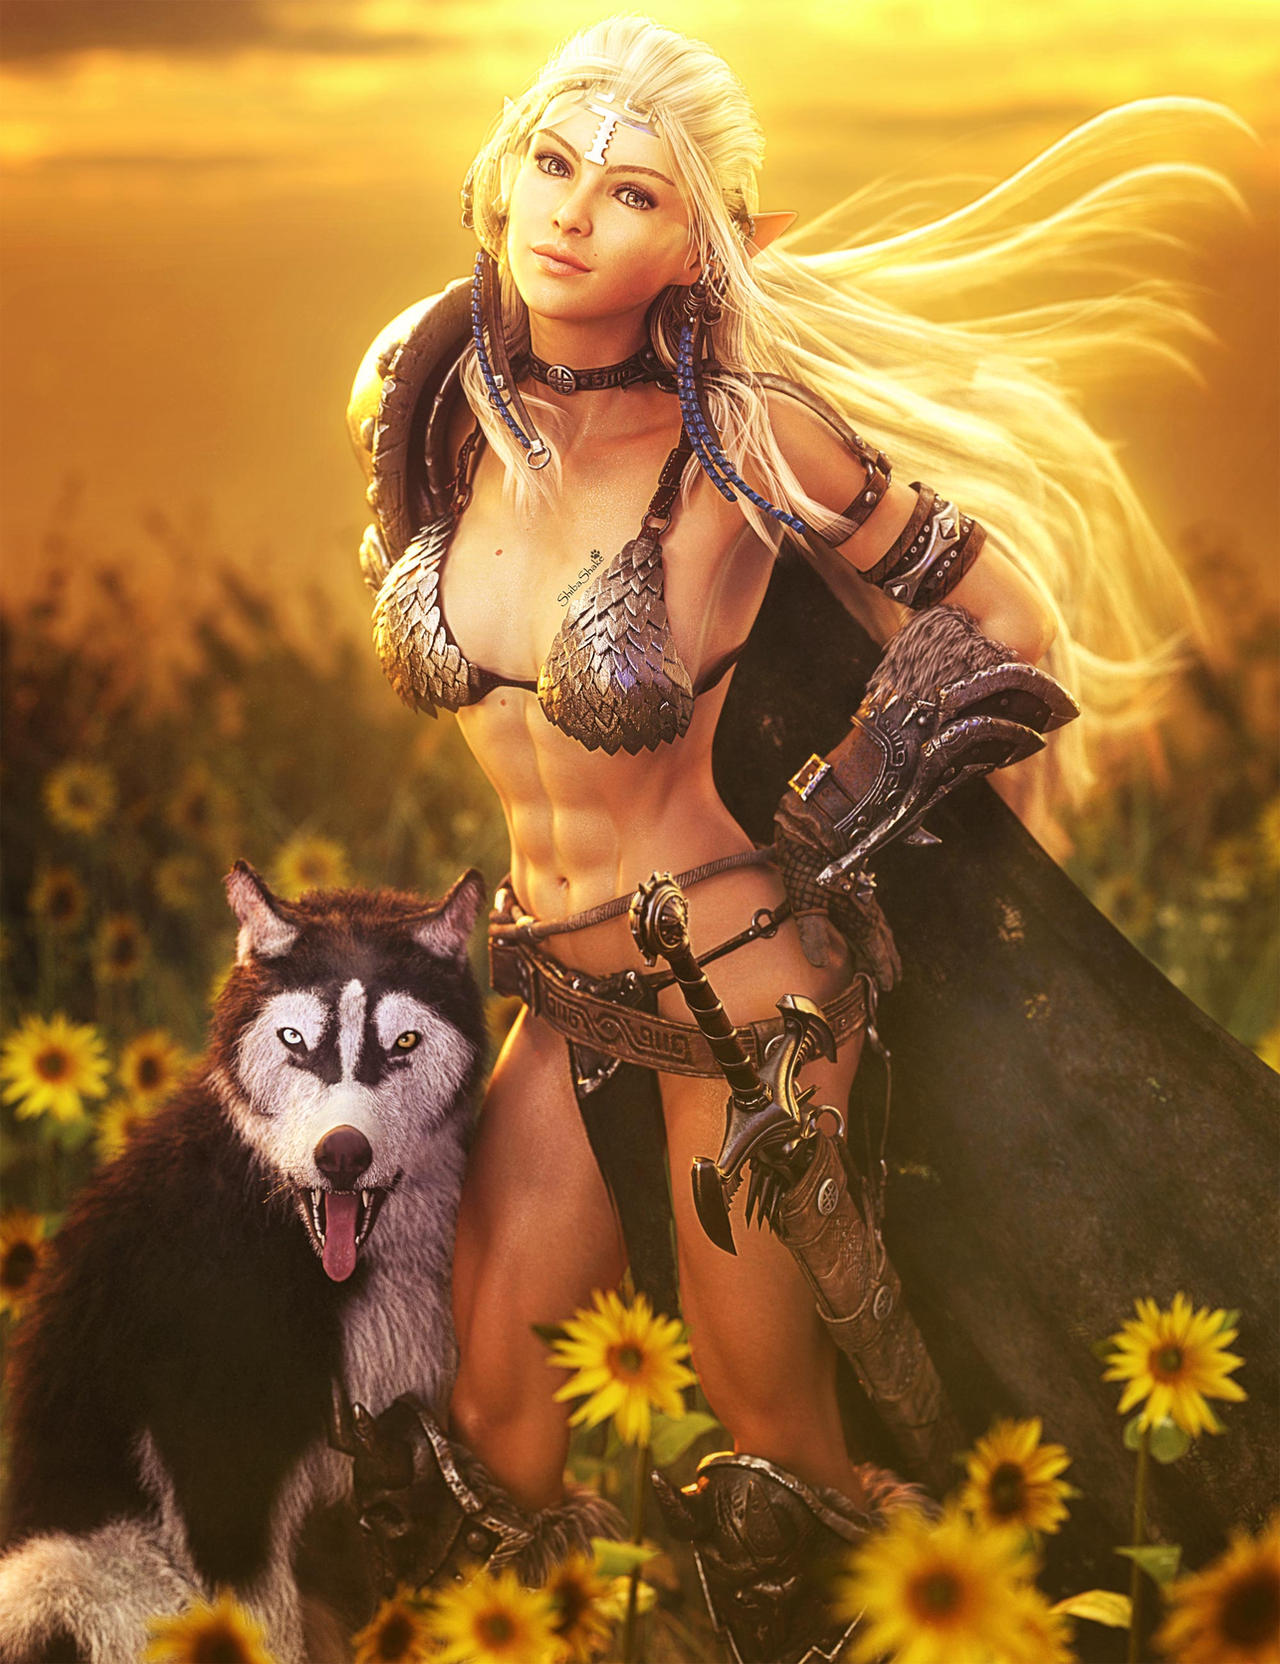 White-haired elf warrior girl with hair flying in the wind, standing next to a Siberian Husky dog. Fantasy elf woman art. Daz Studio Iray image.